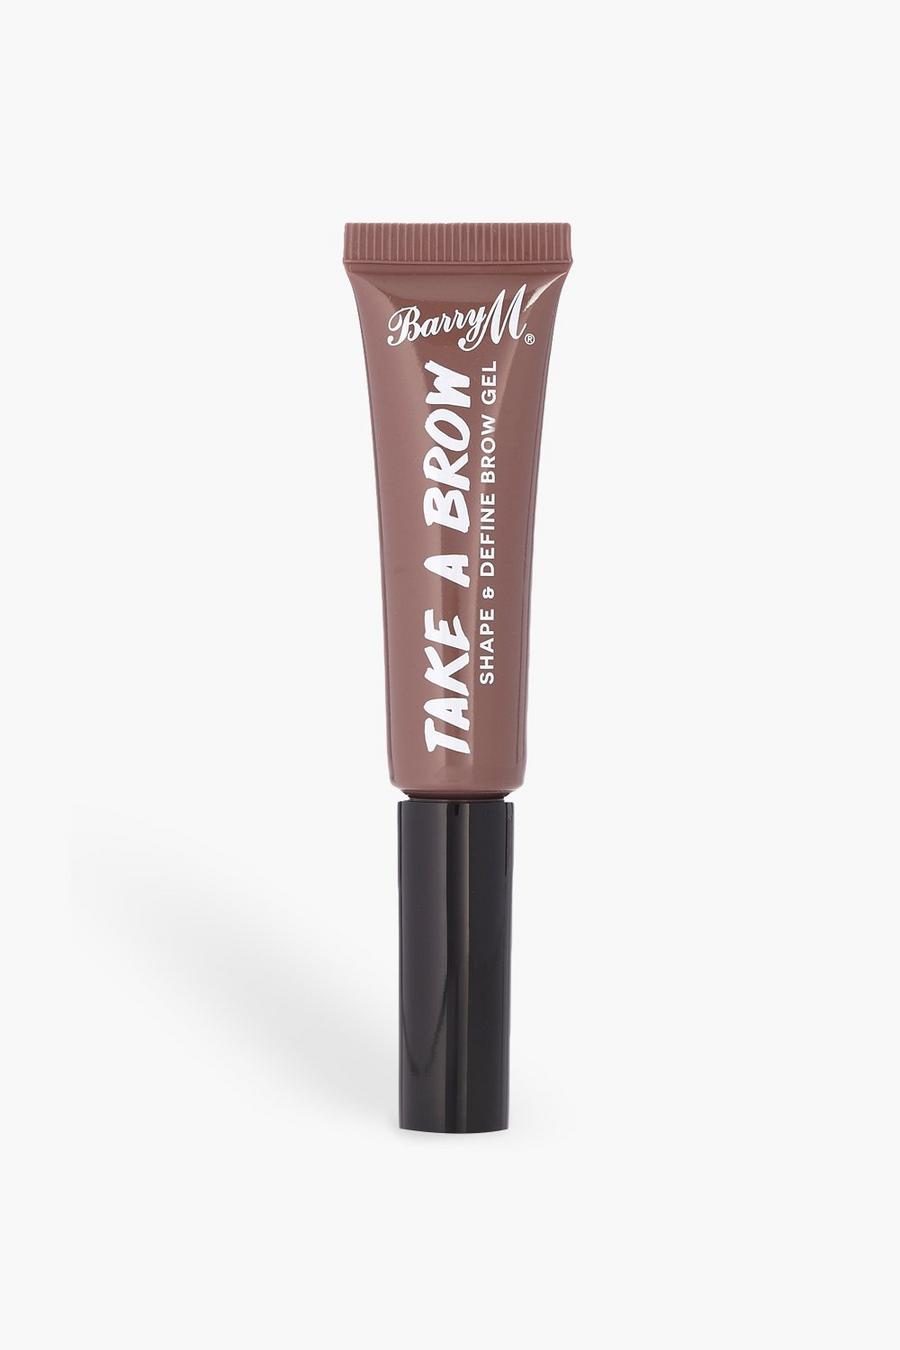 Brown marrone Barry M Take A Brow Gel